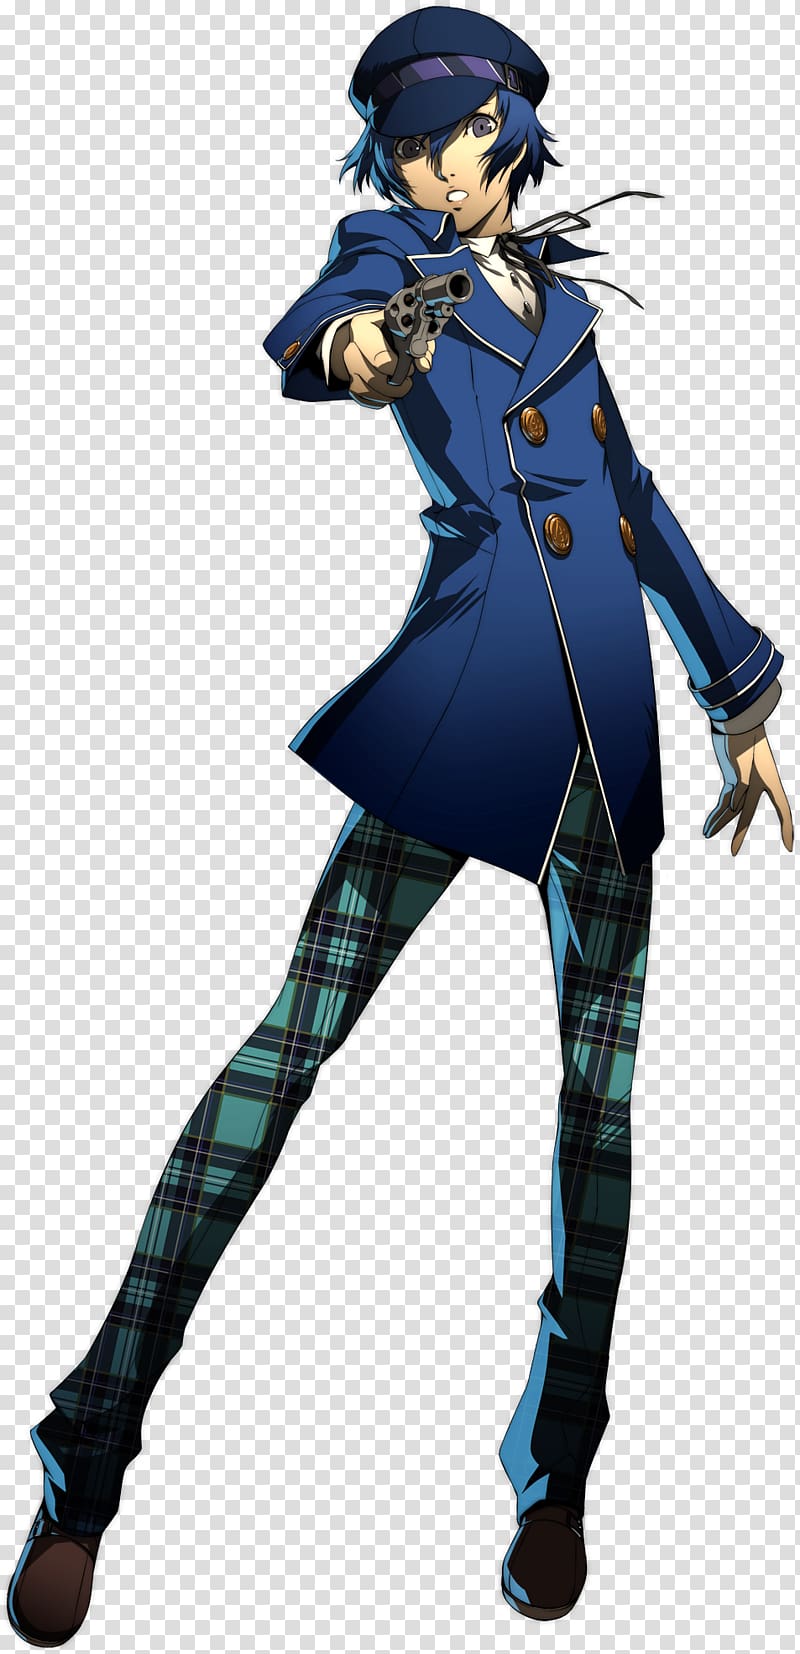 Persona 4 Arena Ultimax Shin Megami Tensei: Persona 4 Shin Megami Tensei: Persona 3 Naoto Shirogane, golden character transparent background PNG clipart